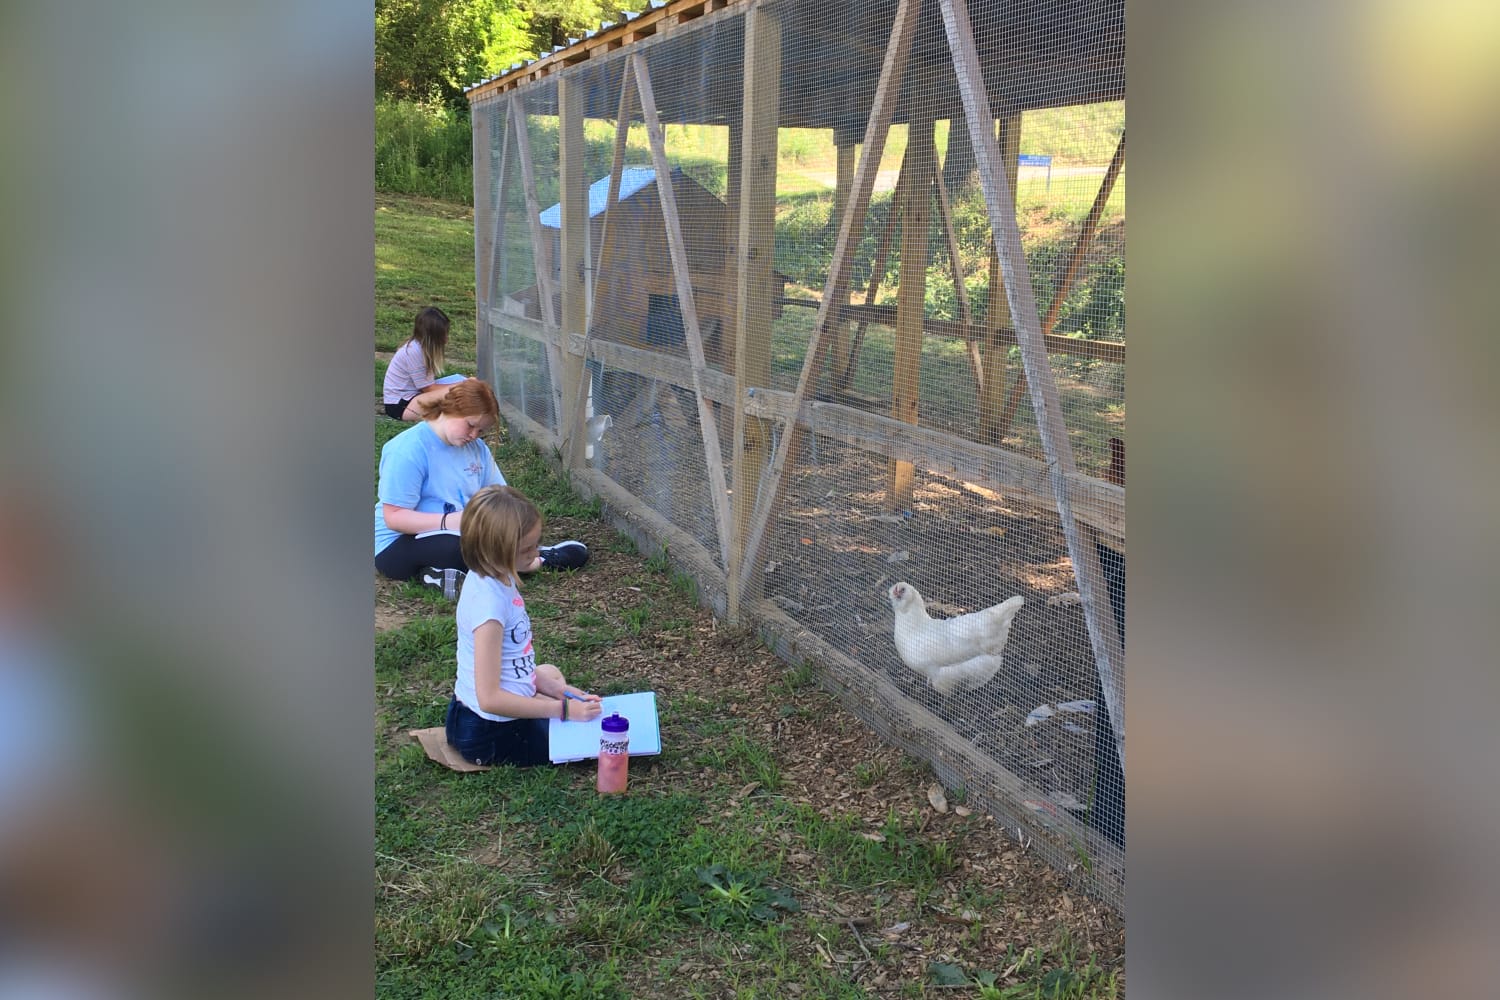 3 PAGE girls writing in their notebooks while observing hens